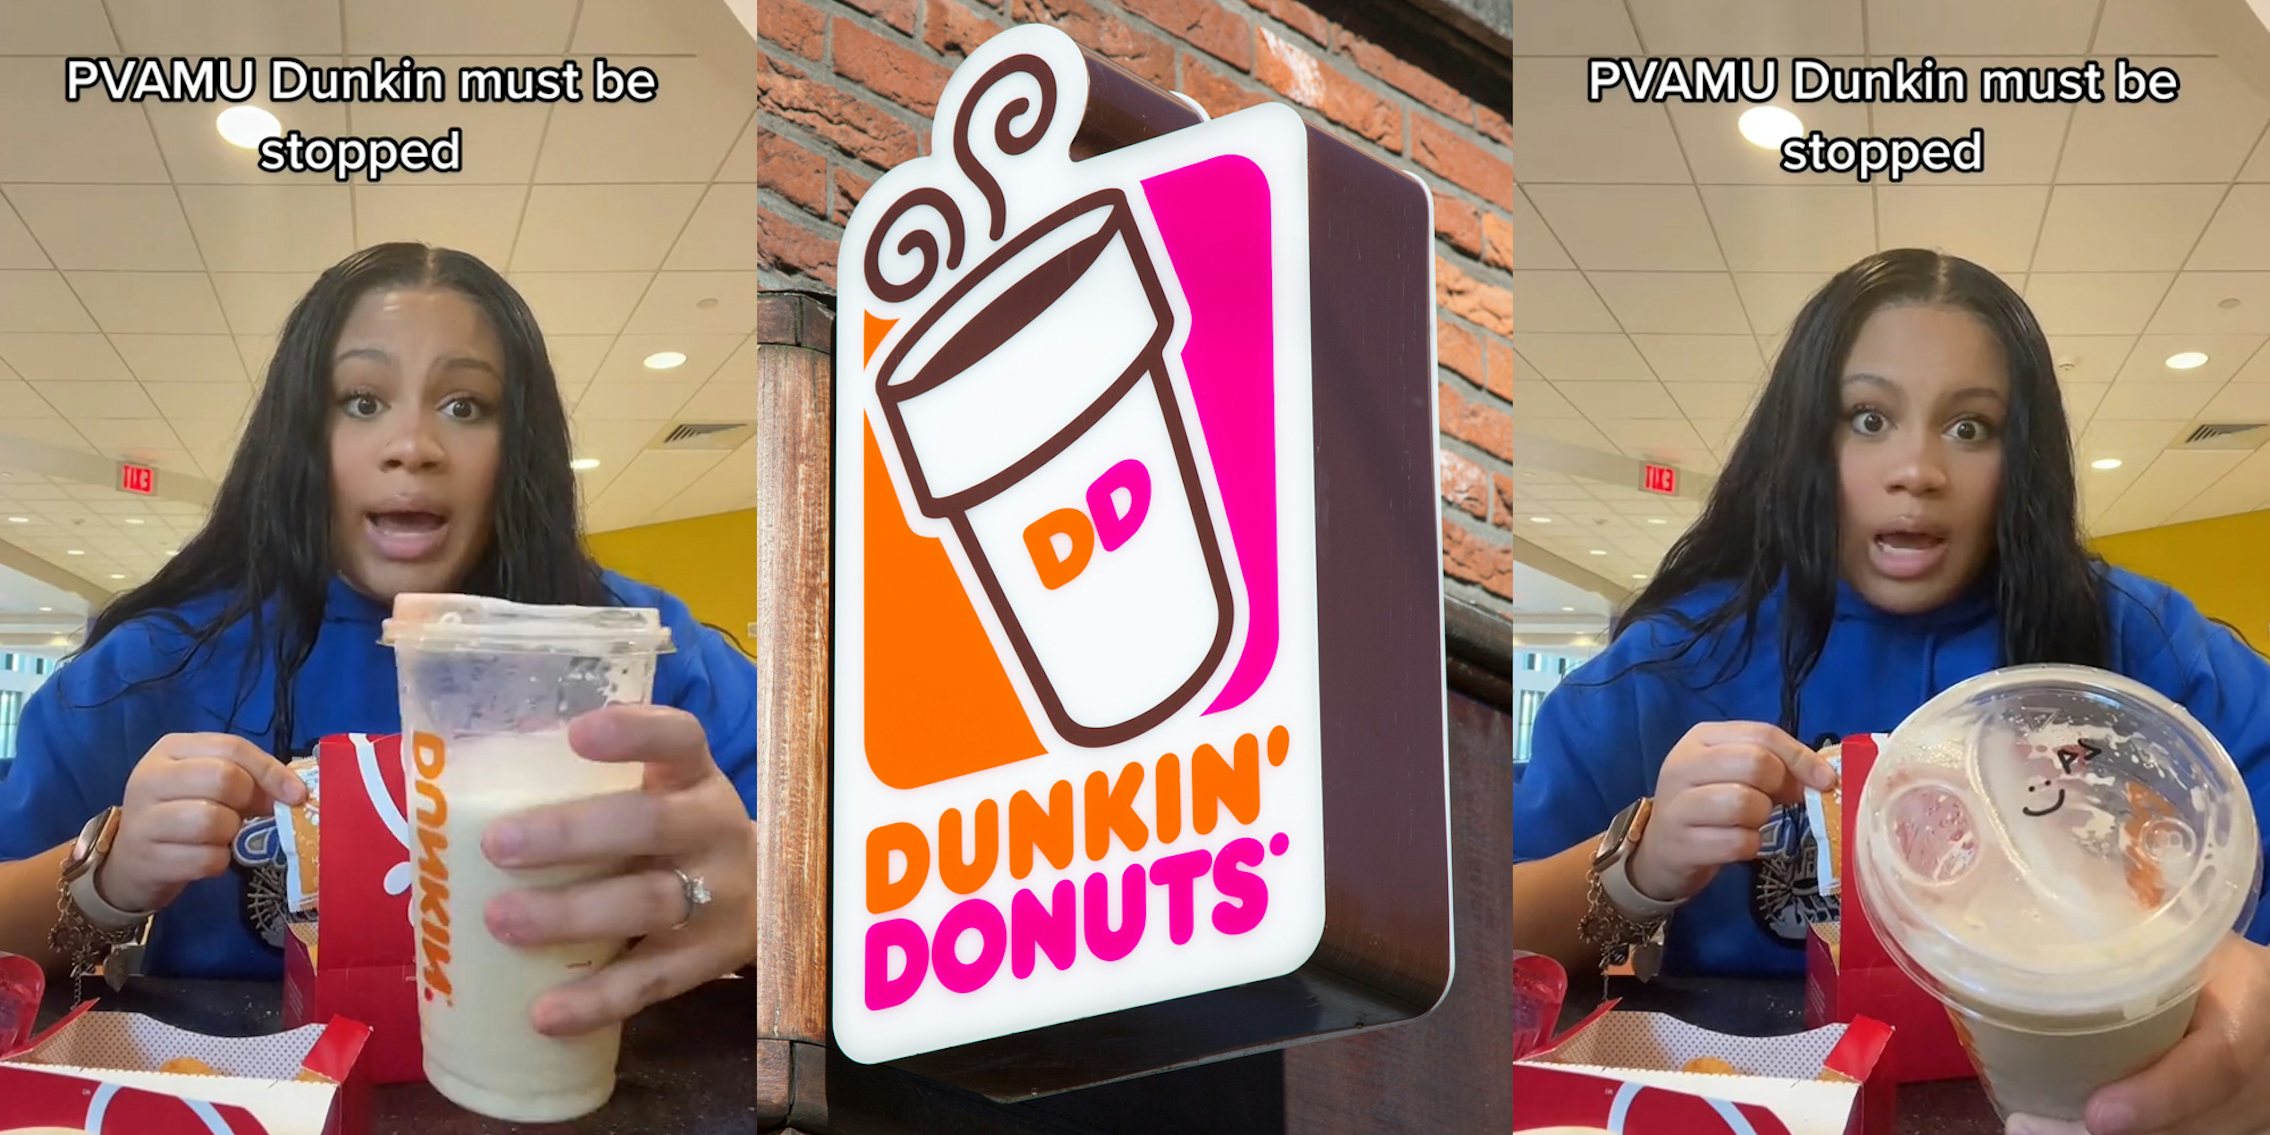 customer speaking holding Dunkin' drink with caption 'PVAMU Dunkin must be stopped' (l) Dunkin' Donuts sign (c) customer speaking holding Dunkin' drink towards camera with sharpie ':) AS' with caption 'PVAMU Dunkin must be stopped' (r)